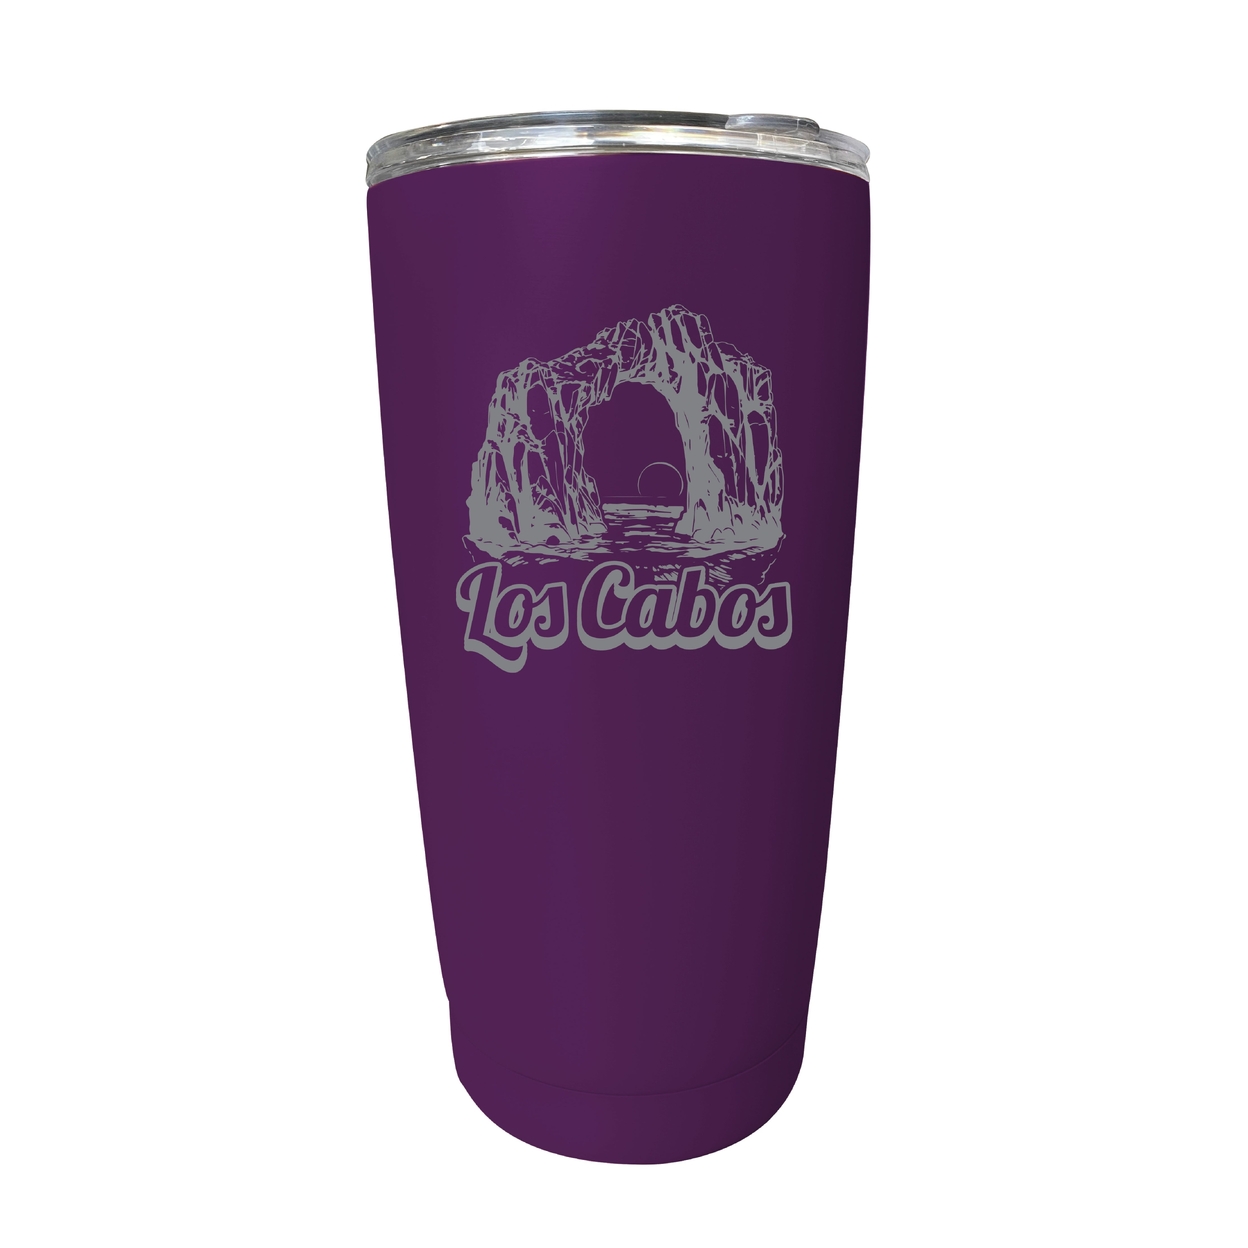 Los Cabos Mexico Souvenir 16 Oz Engraved Stainless Steel Insulated Tumbler - Purple,,Single Unit